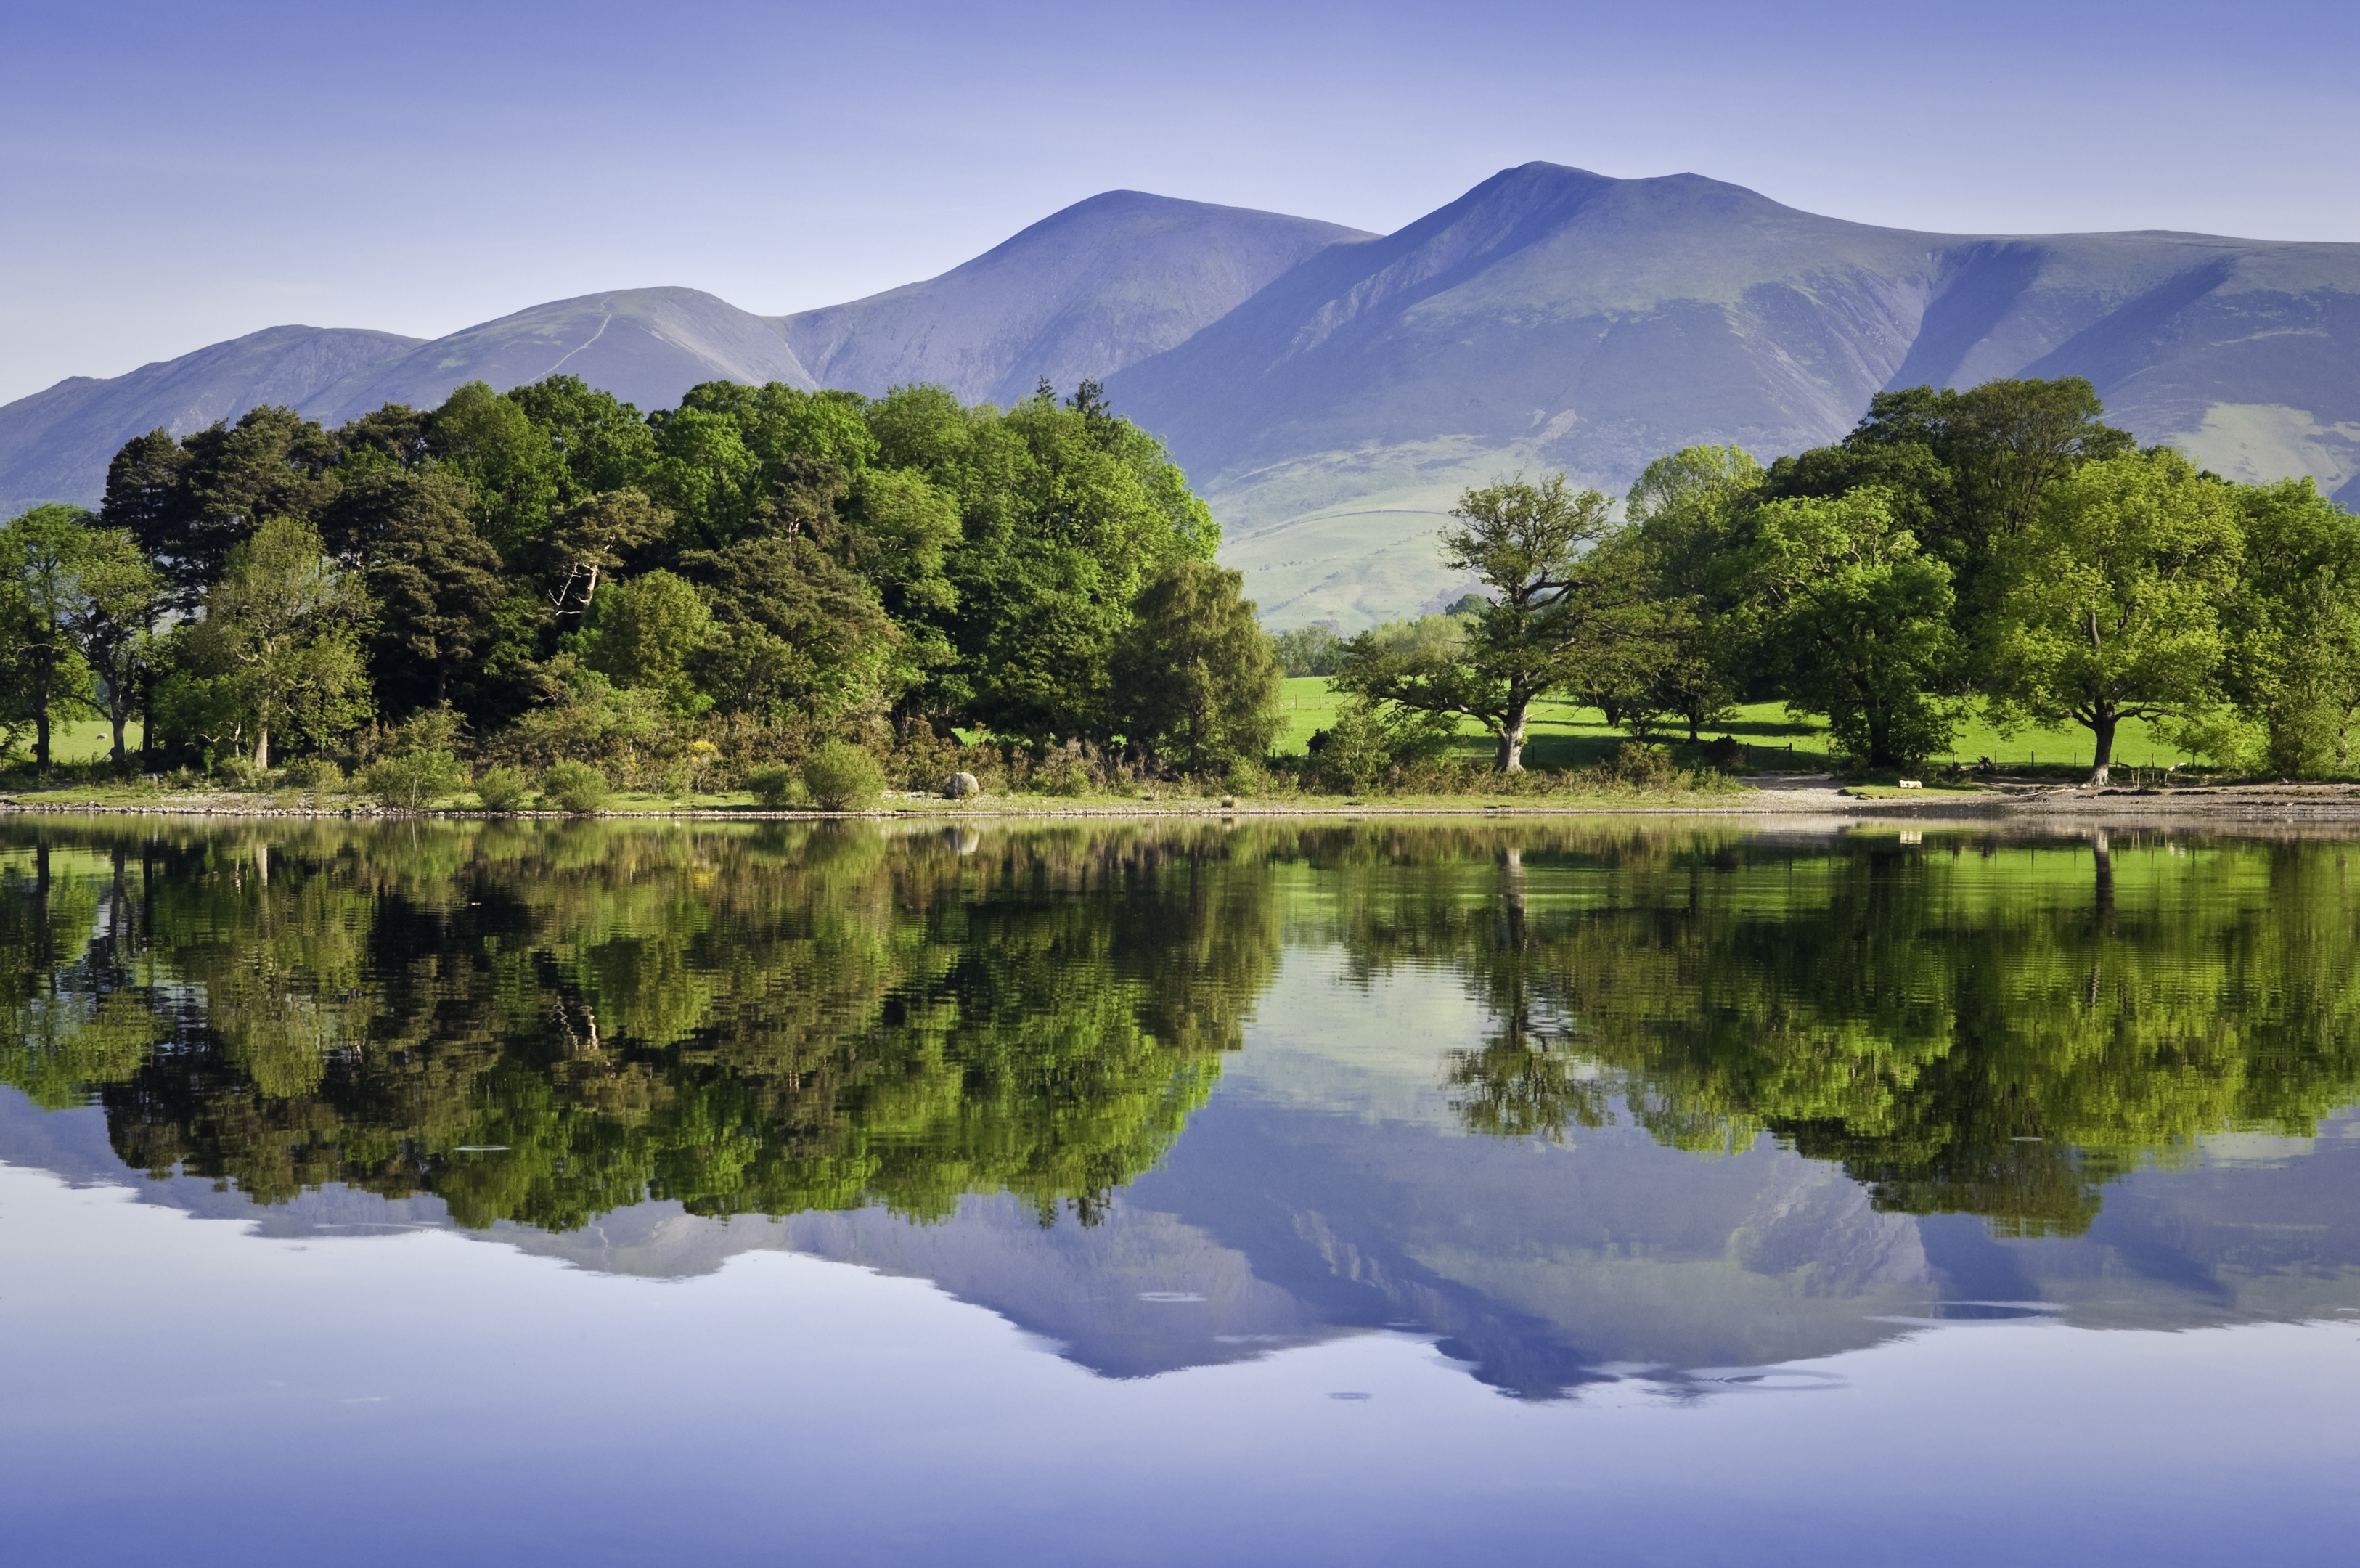 Derwent Water in the Lake District (Getty)